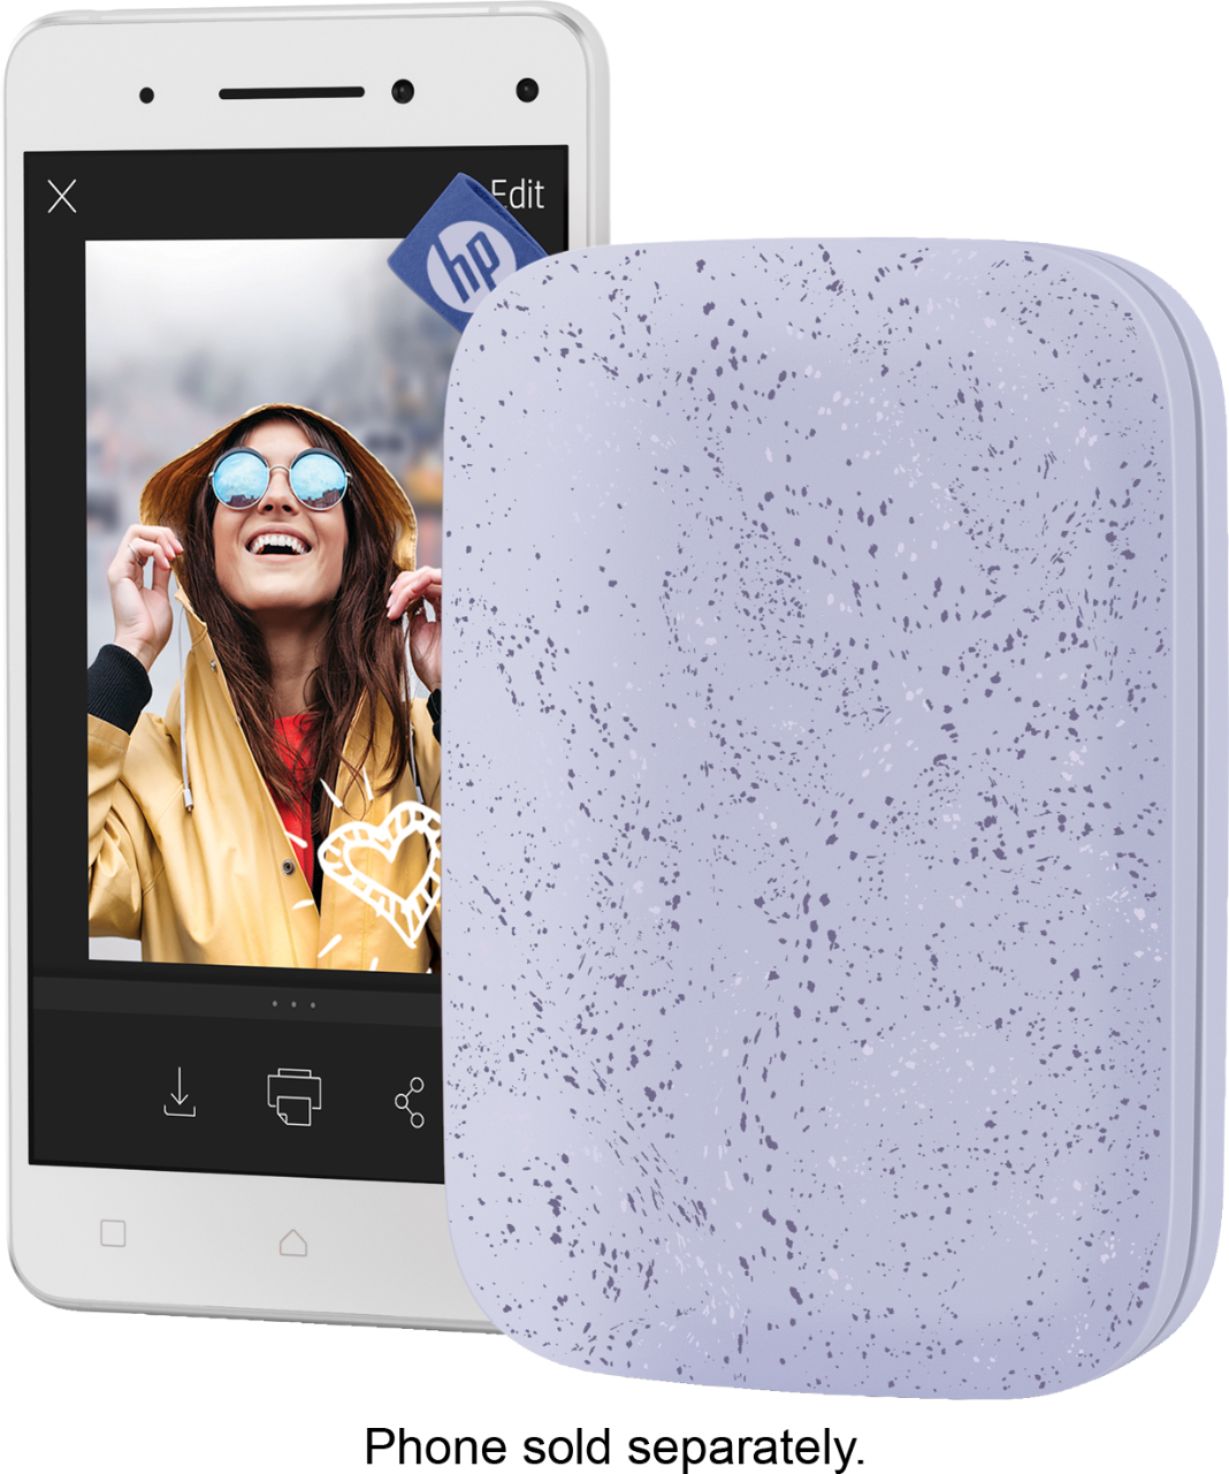 HP Sprocket Portable 2x3 Instant Photo Printer (Lilac) Zink Paper